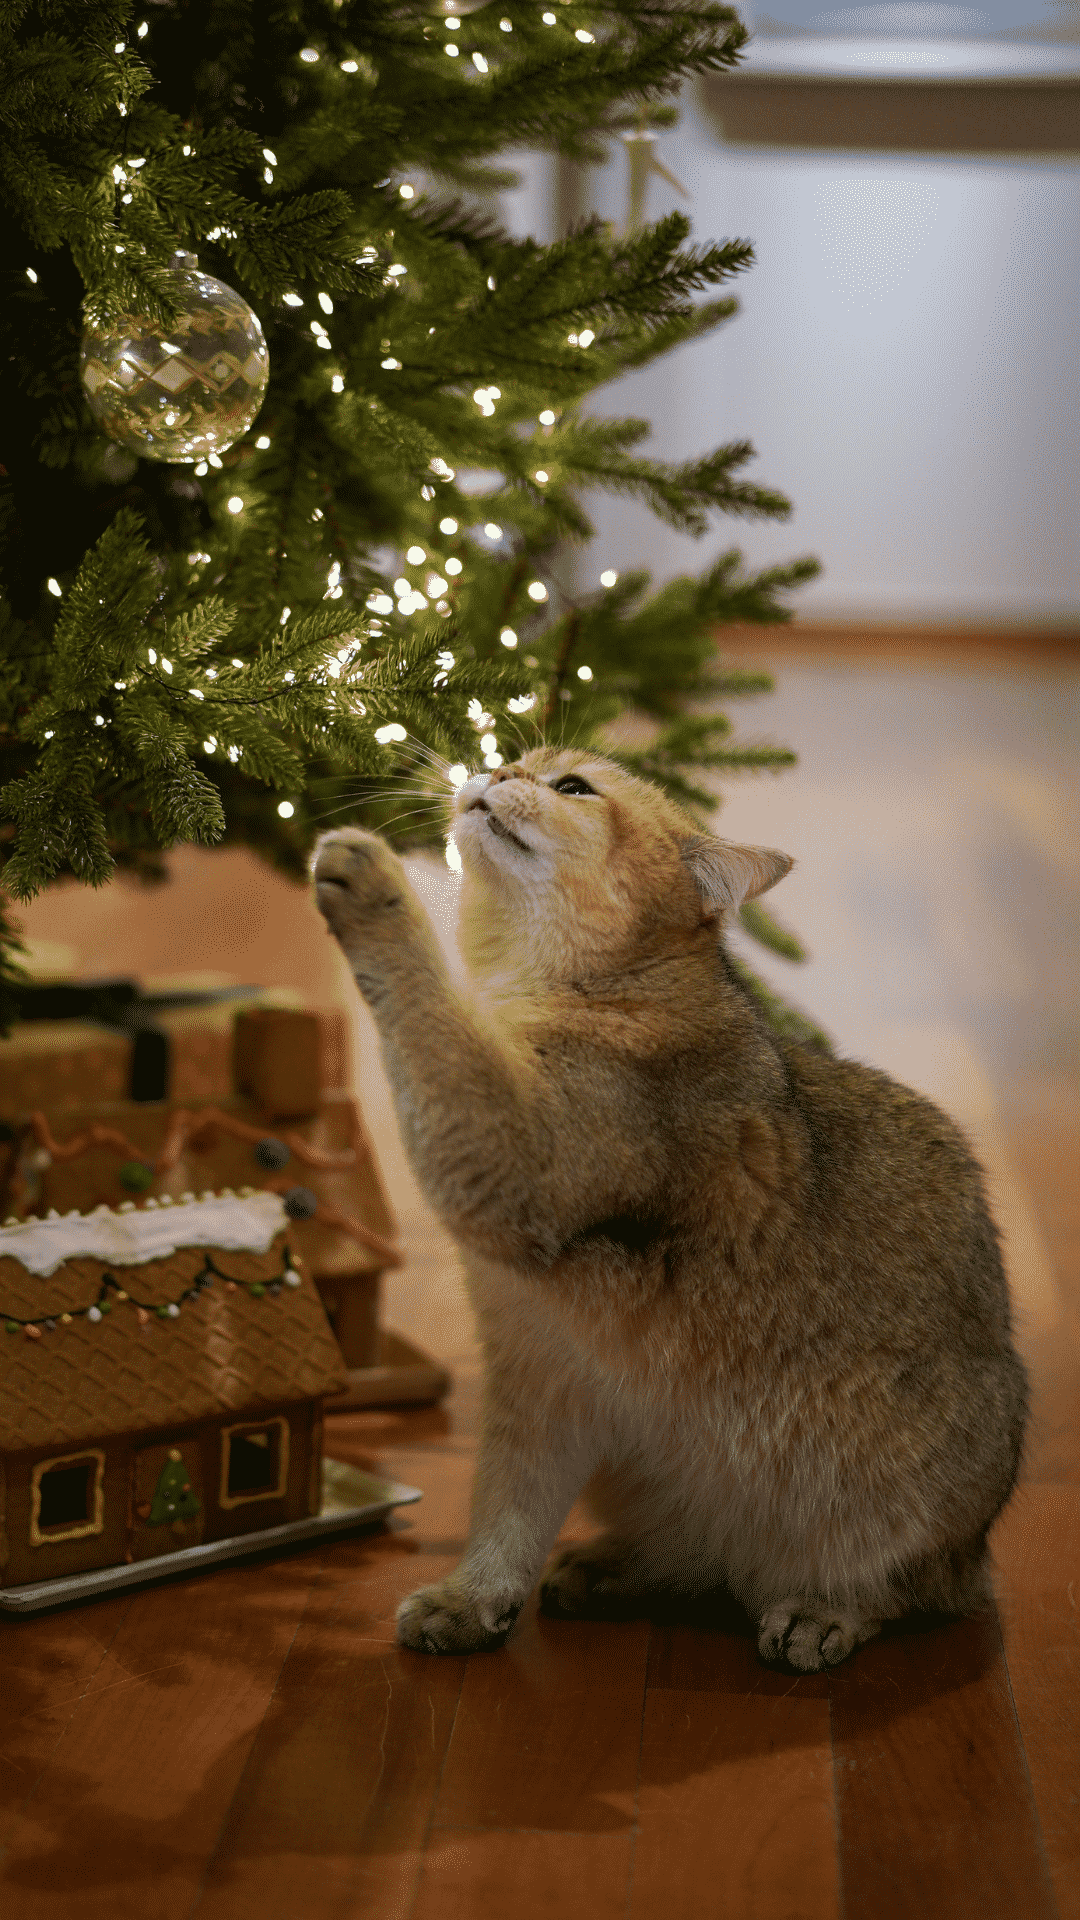 A cat sitting under a Christmas tree - Cute Christmas